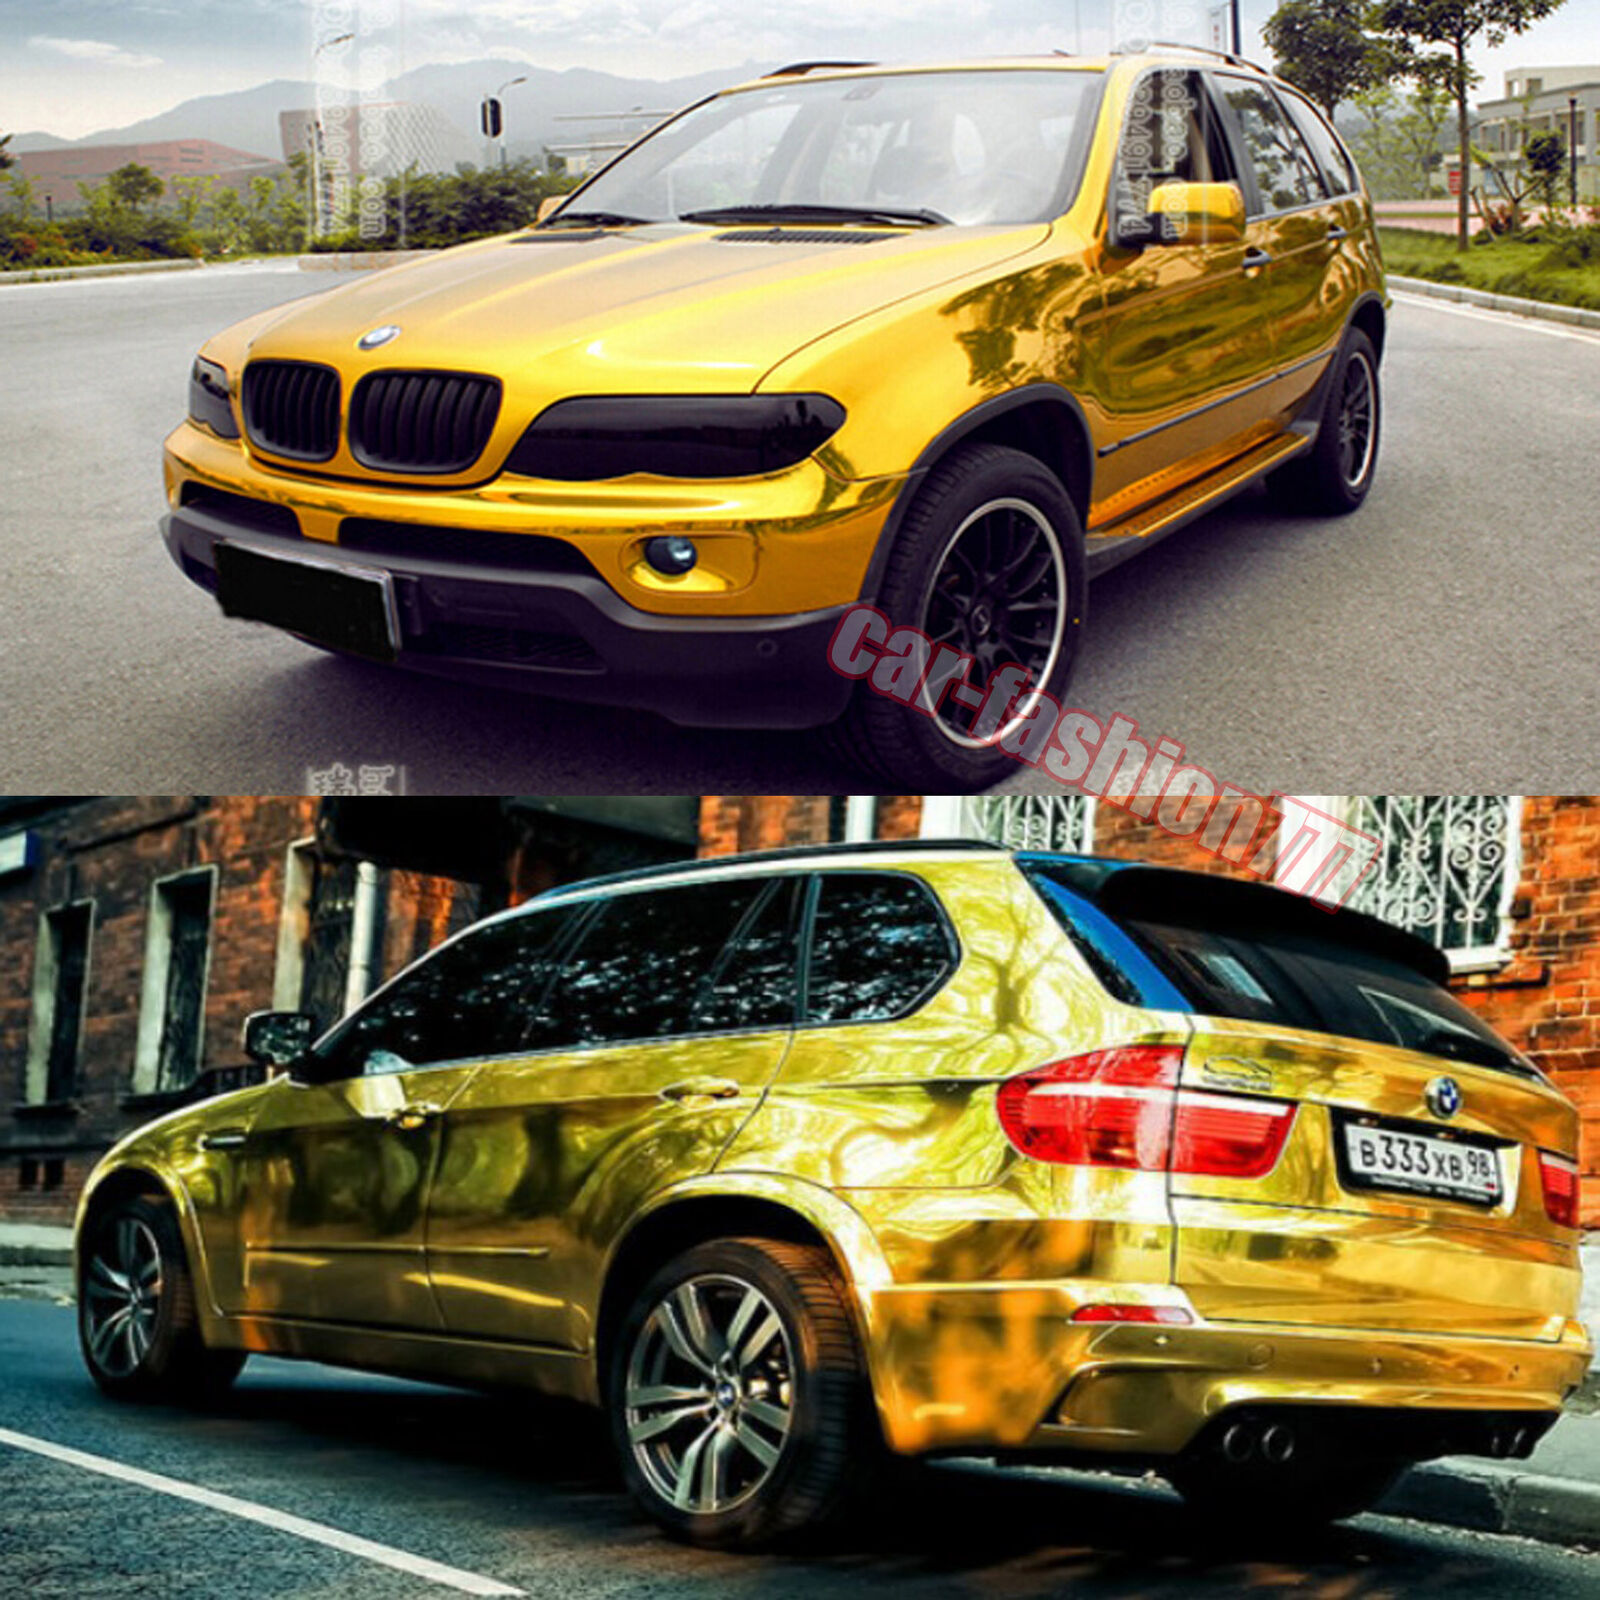 Whole Car Wrapping Gold Mirror Chrome Metal Vinyl Sticker Film Bubbles Free US